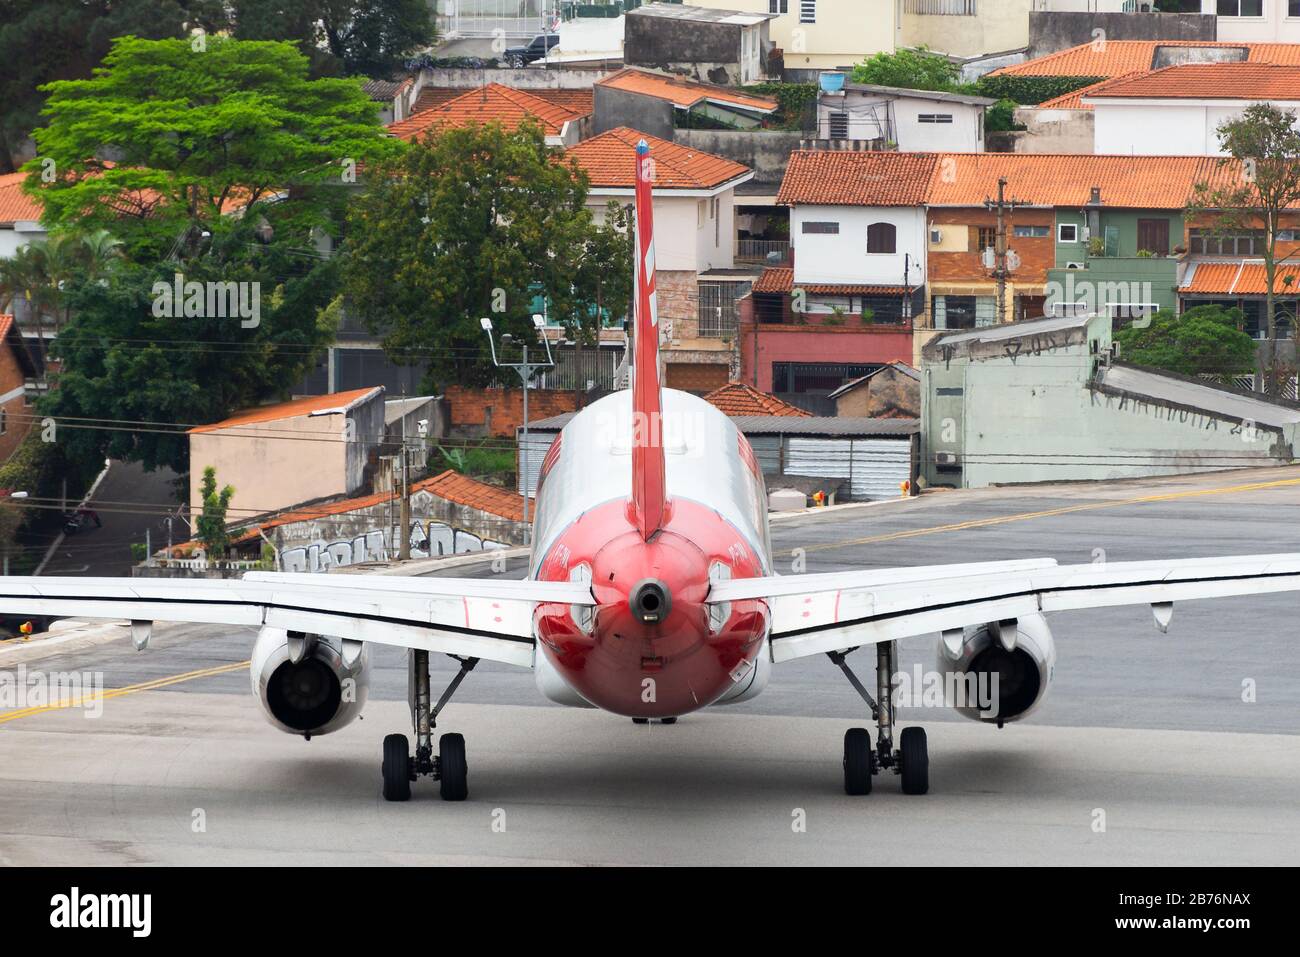 TAM Airlines Airbus A319 in the runway of Congonhas Airport in Sao Paulo, Brazil with residential houses in background. Airport safety margins. Stock Photo